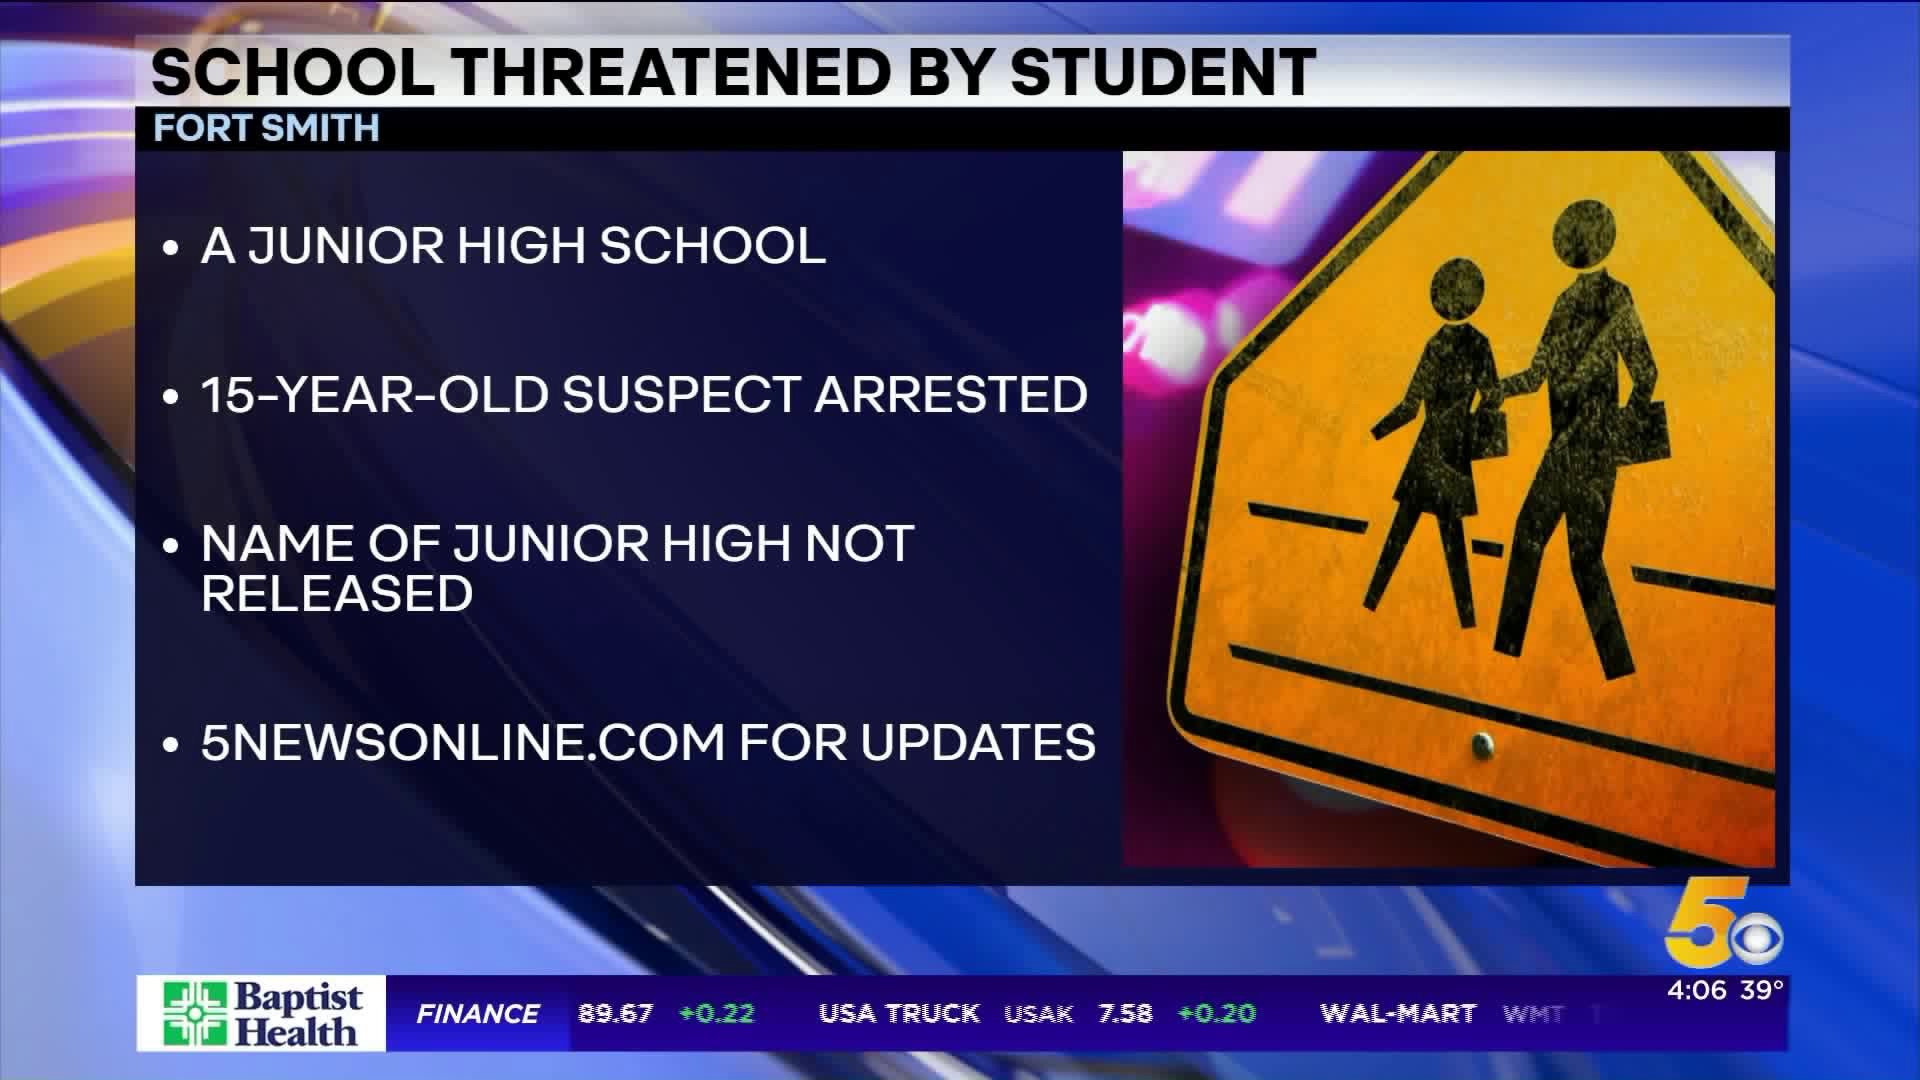 Fort Smith School Threatened By Student On Social Media